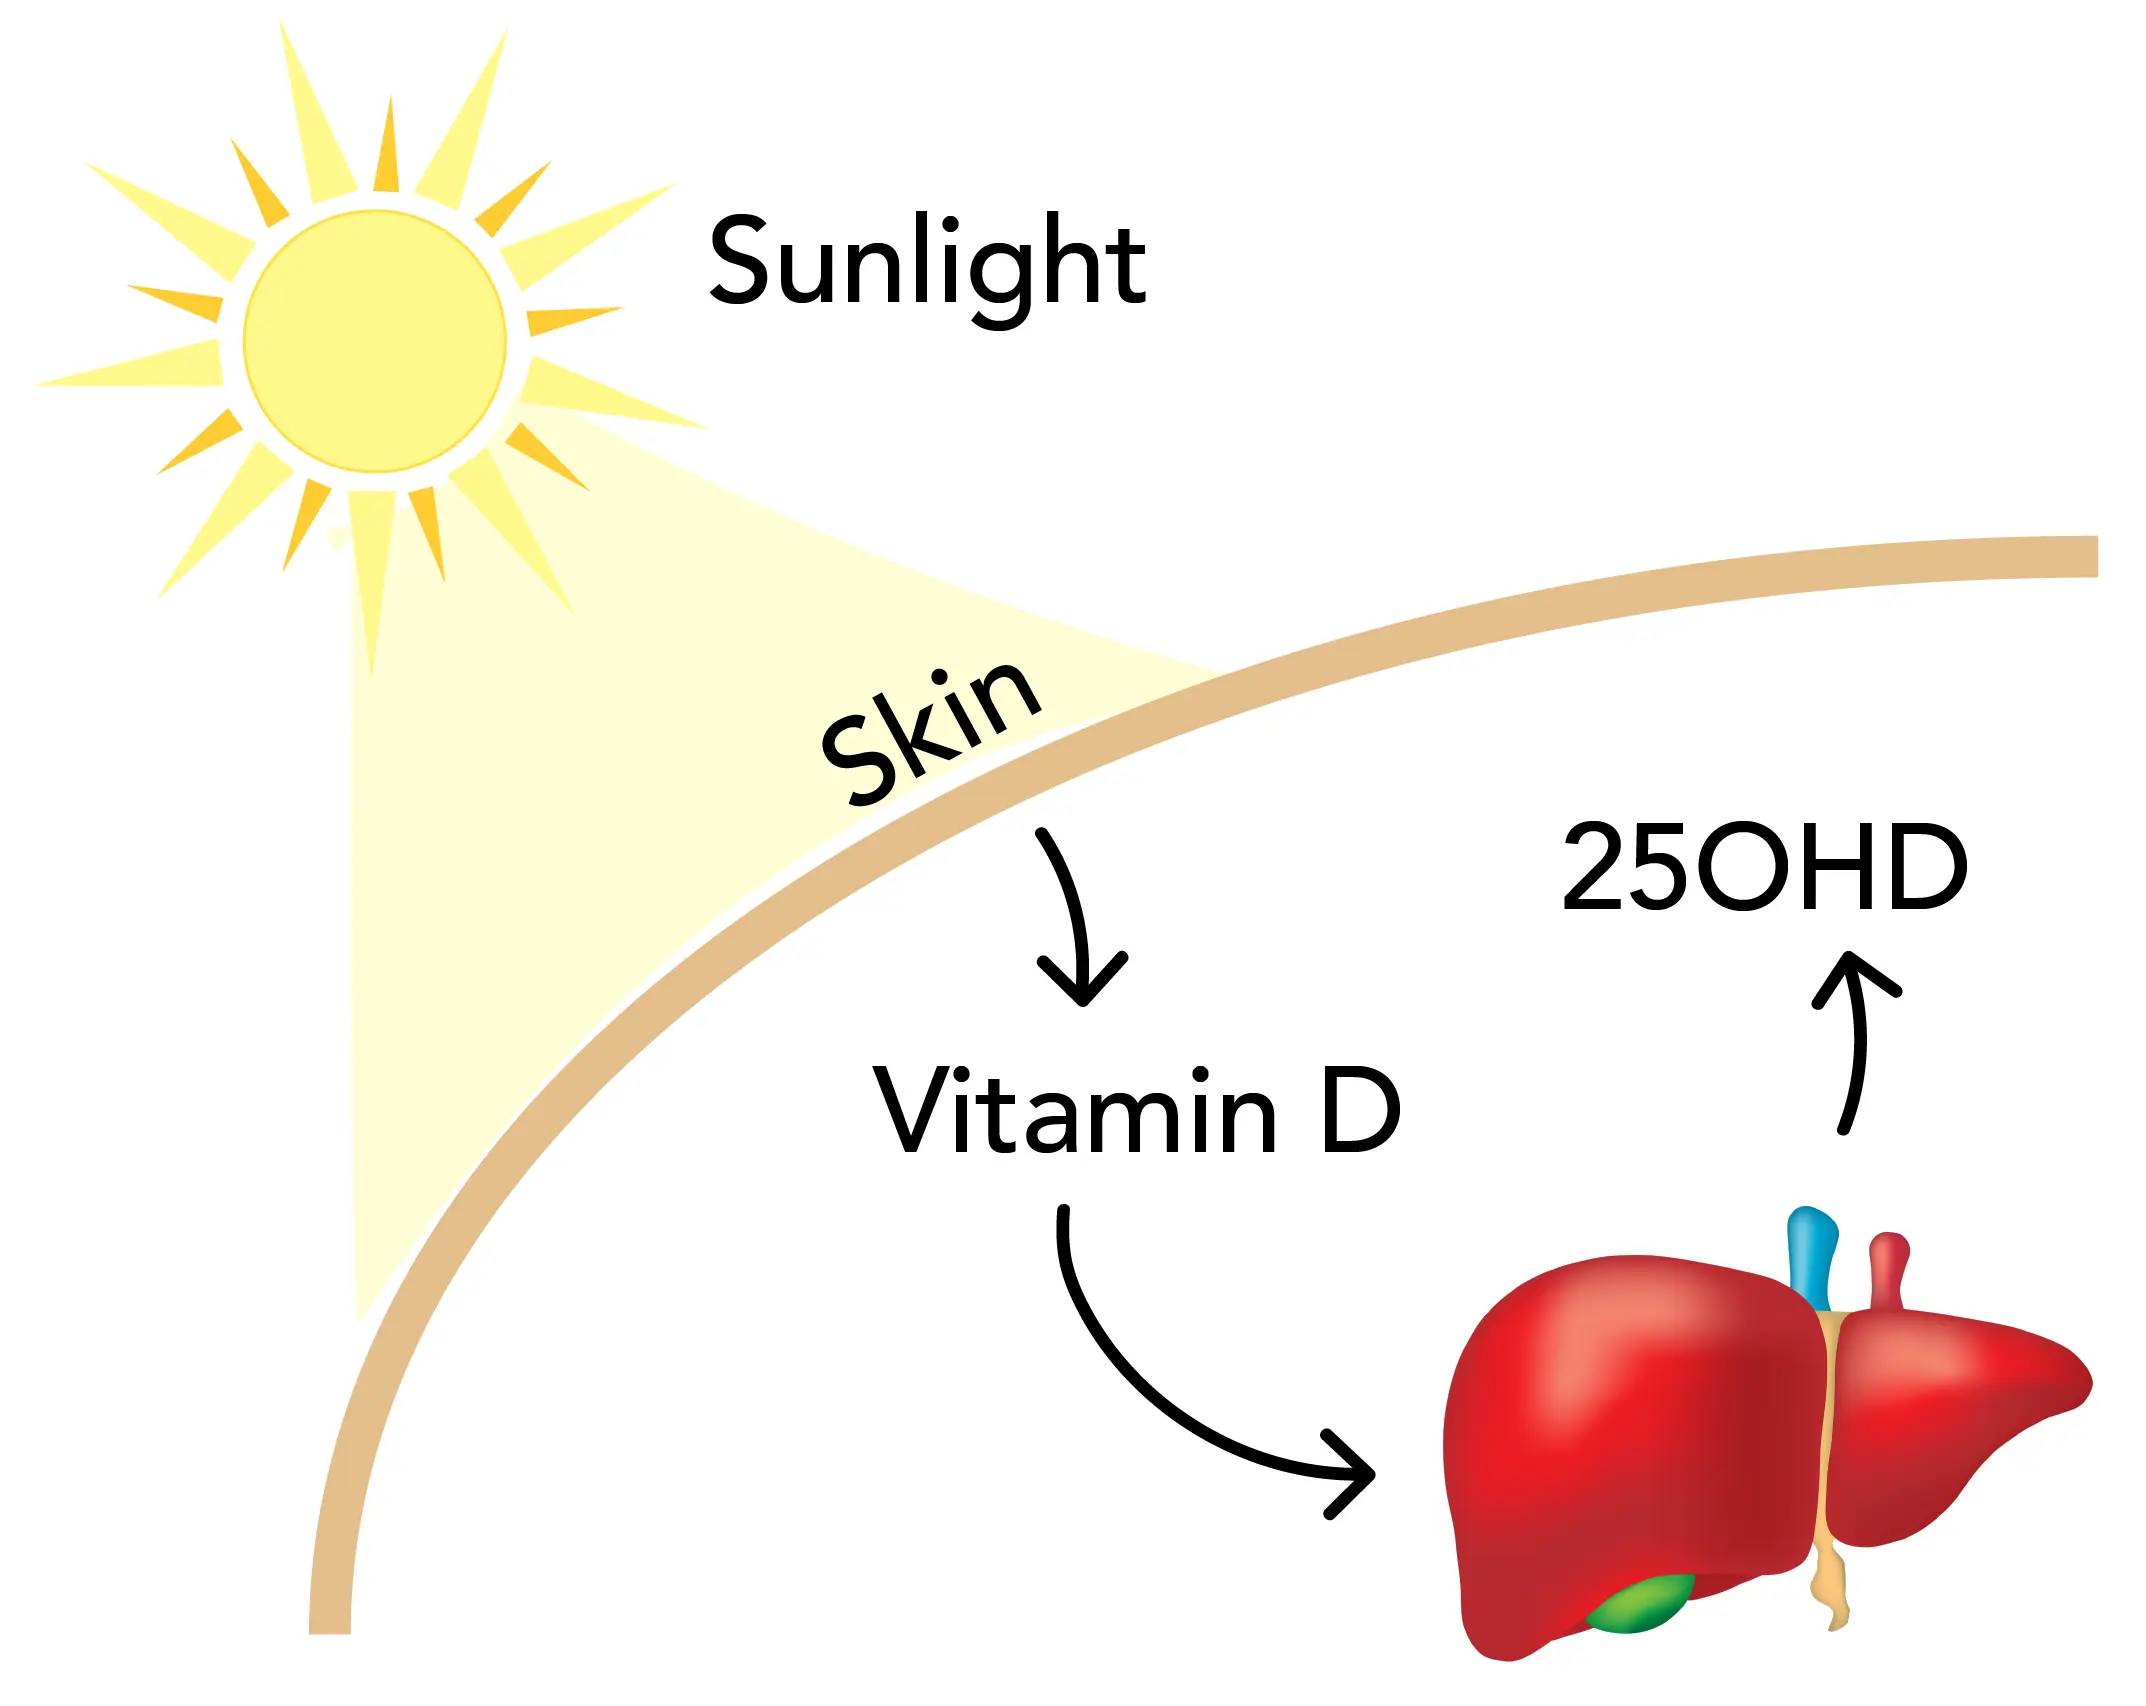 25-hydroxyvitamin D is synthesized in the liver from Vitamin D.